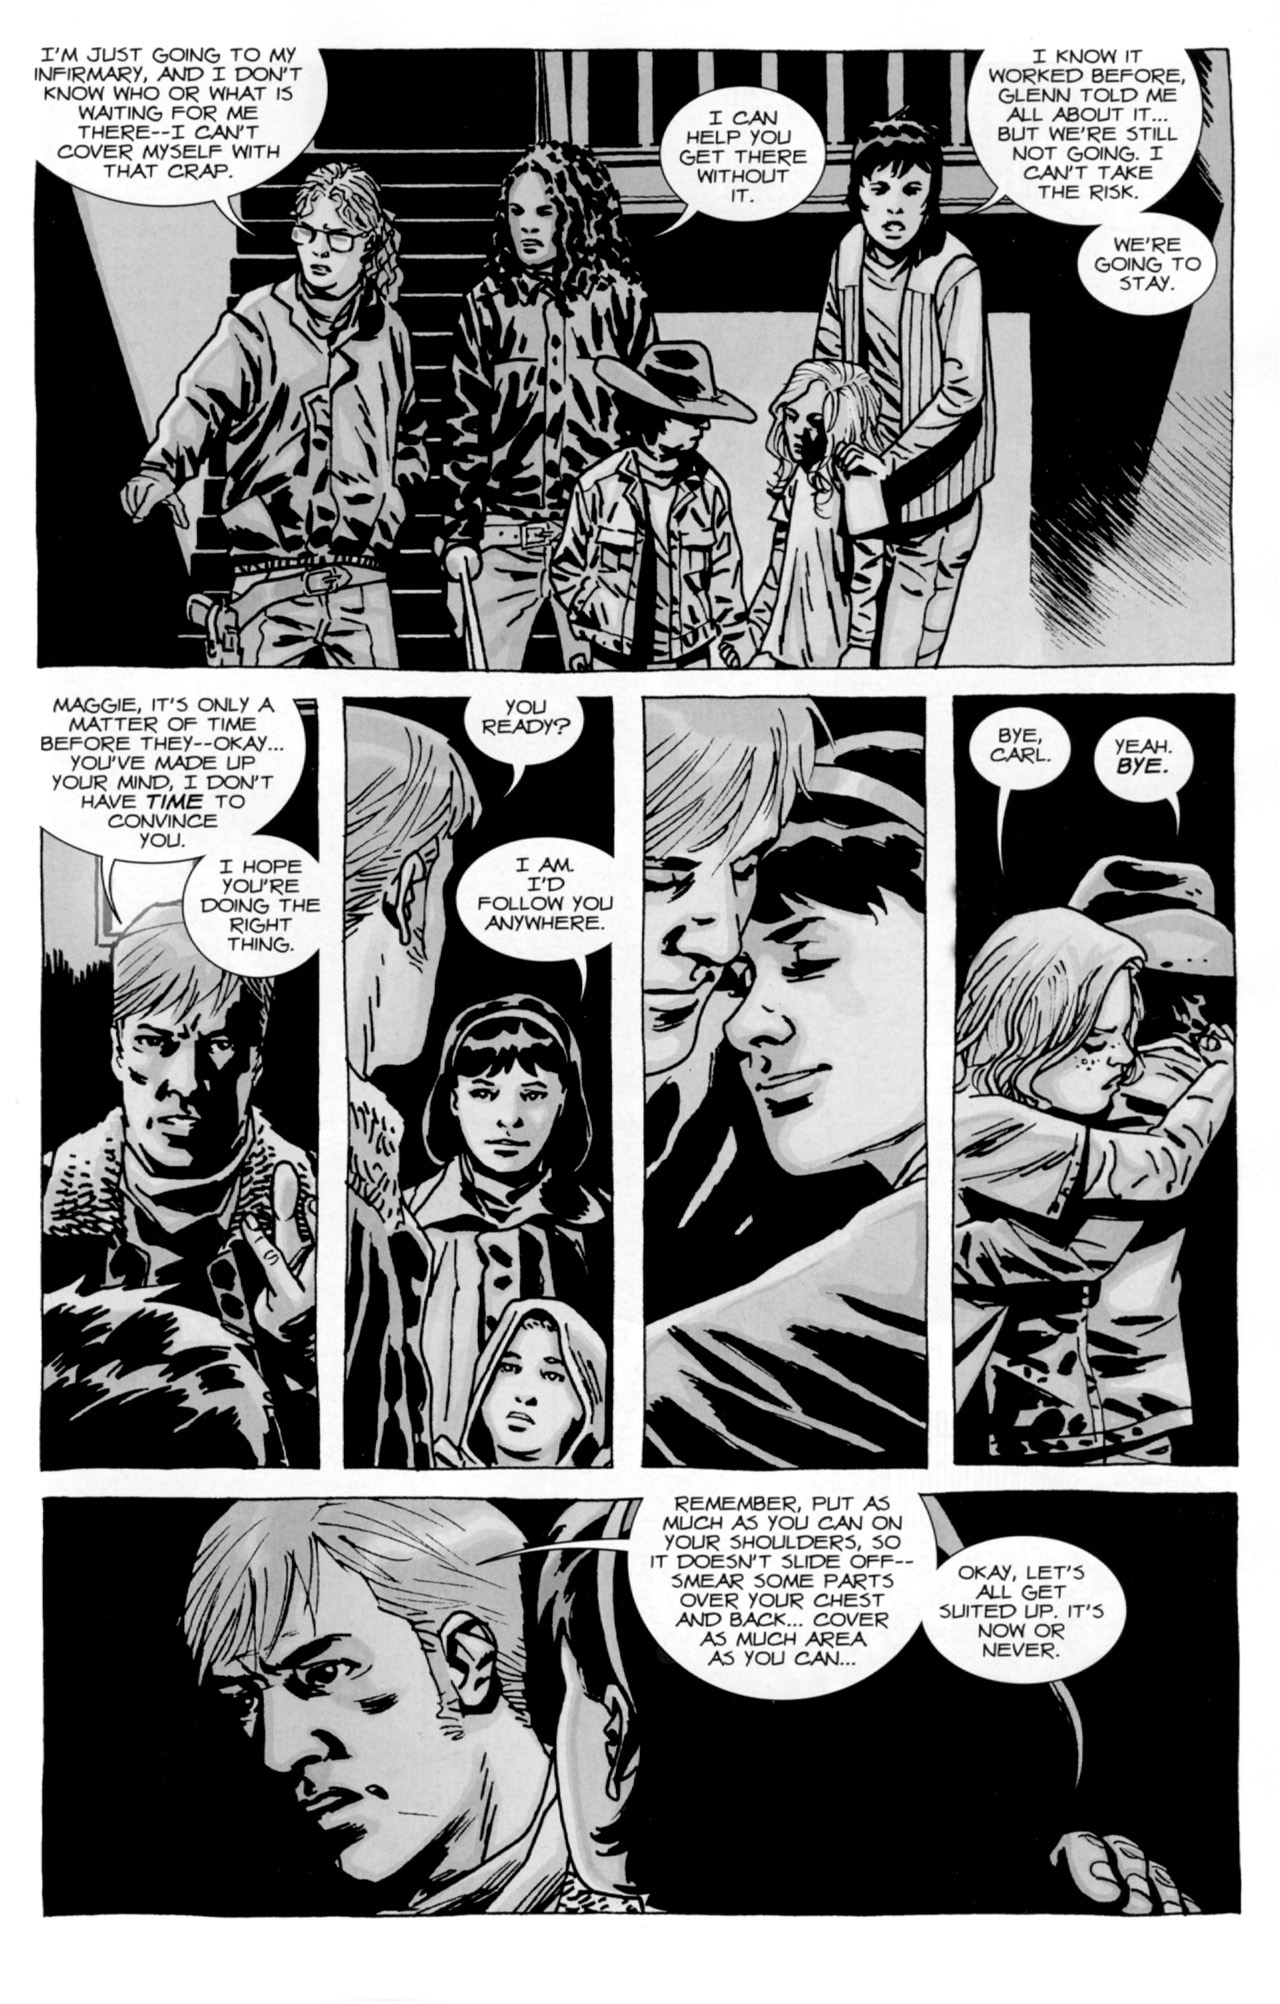 The Walking Dead #83 - NO WAY OUT, PART FOUR 